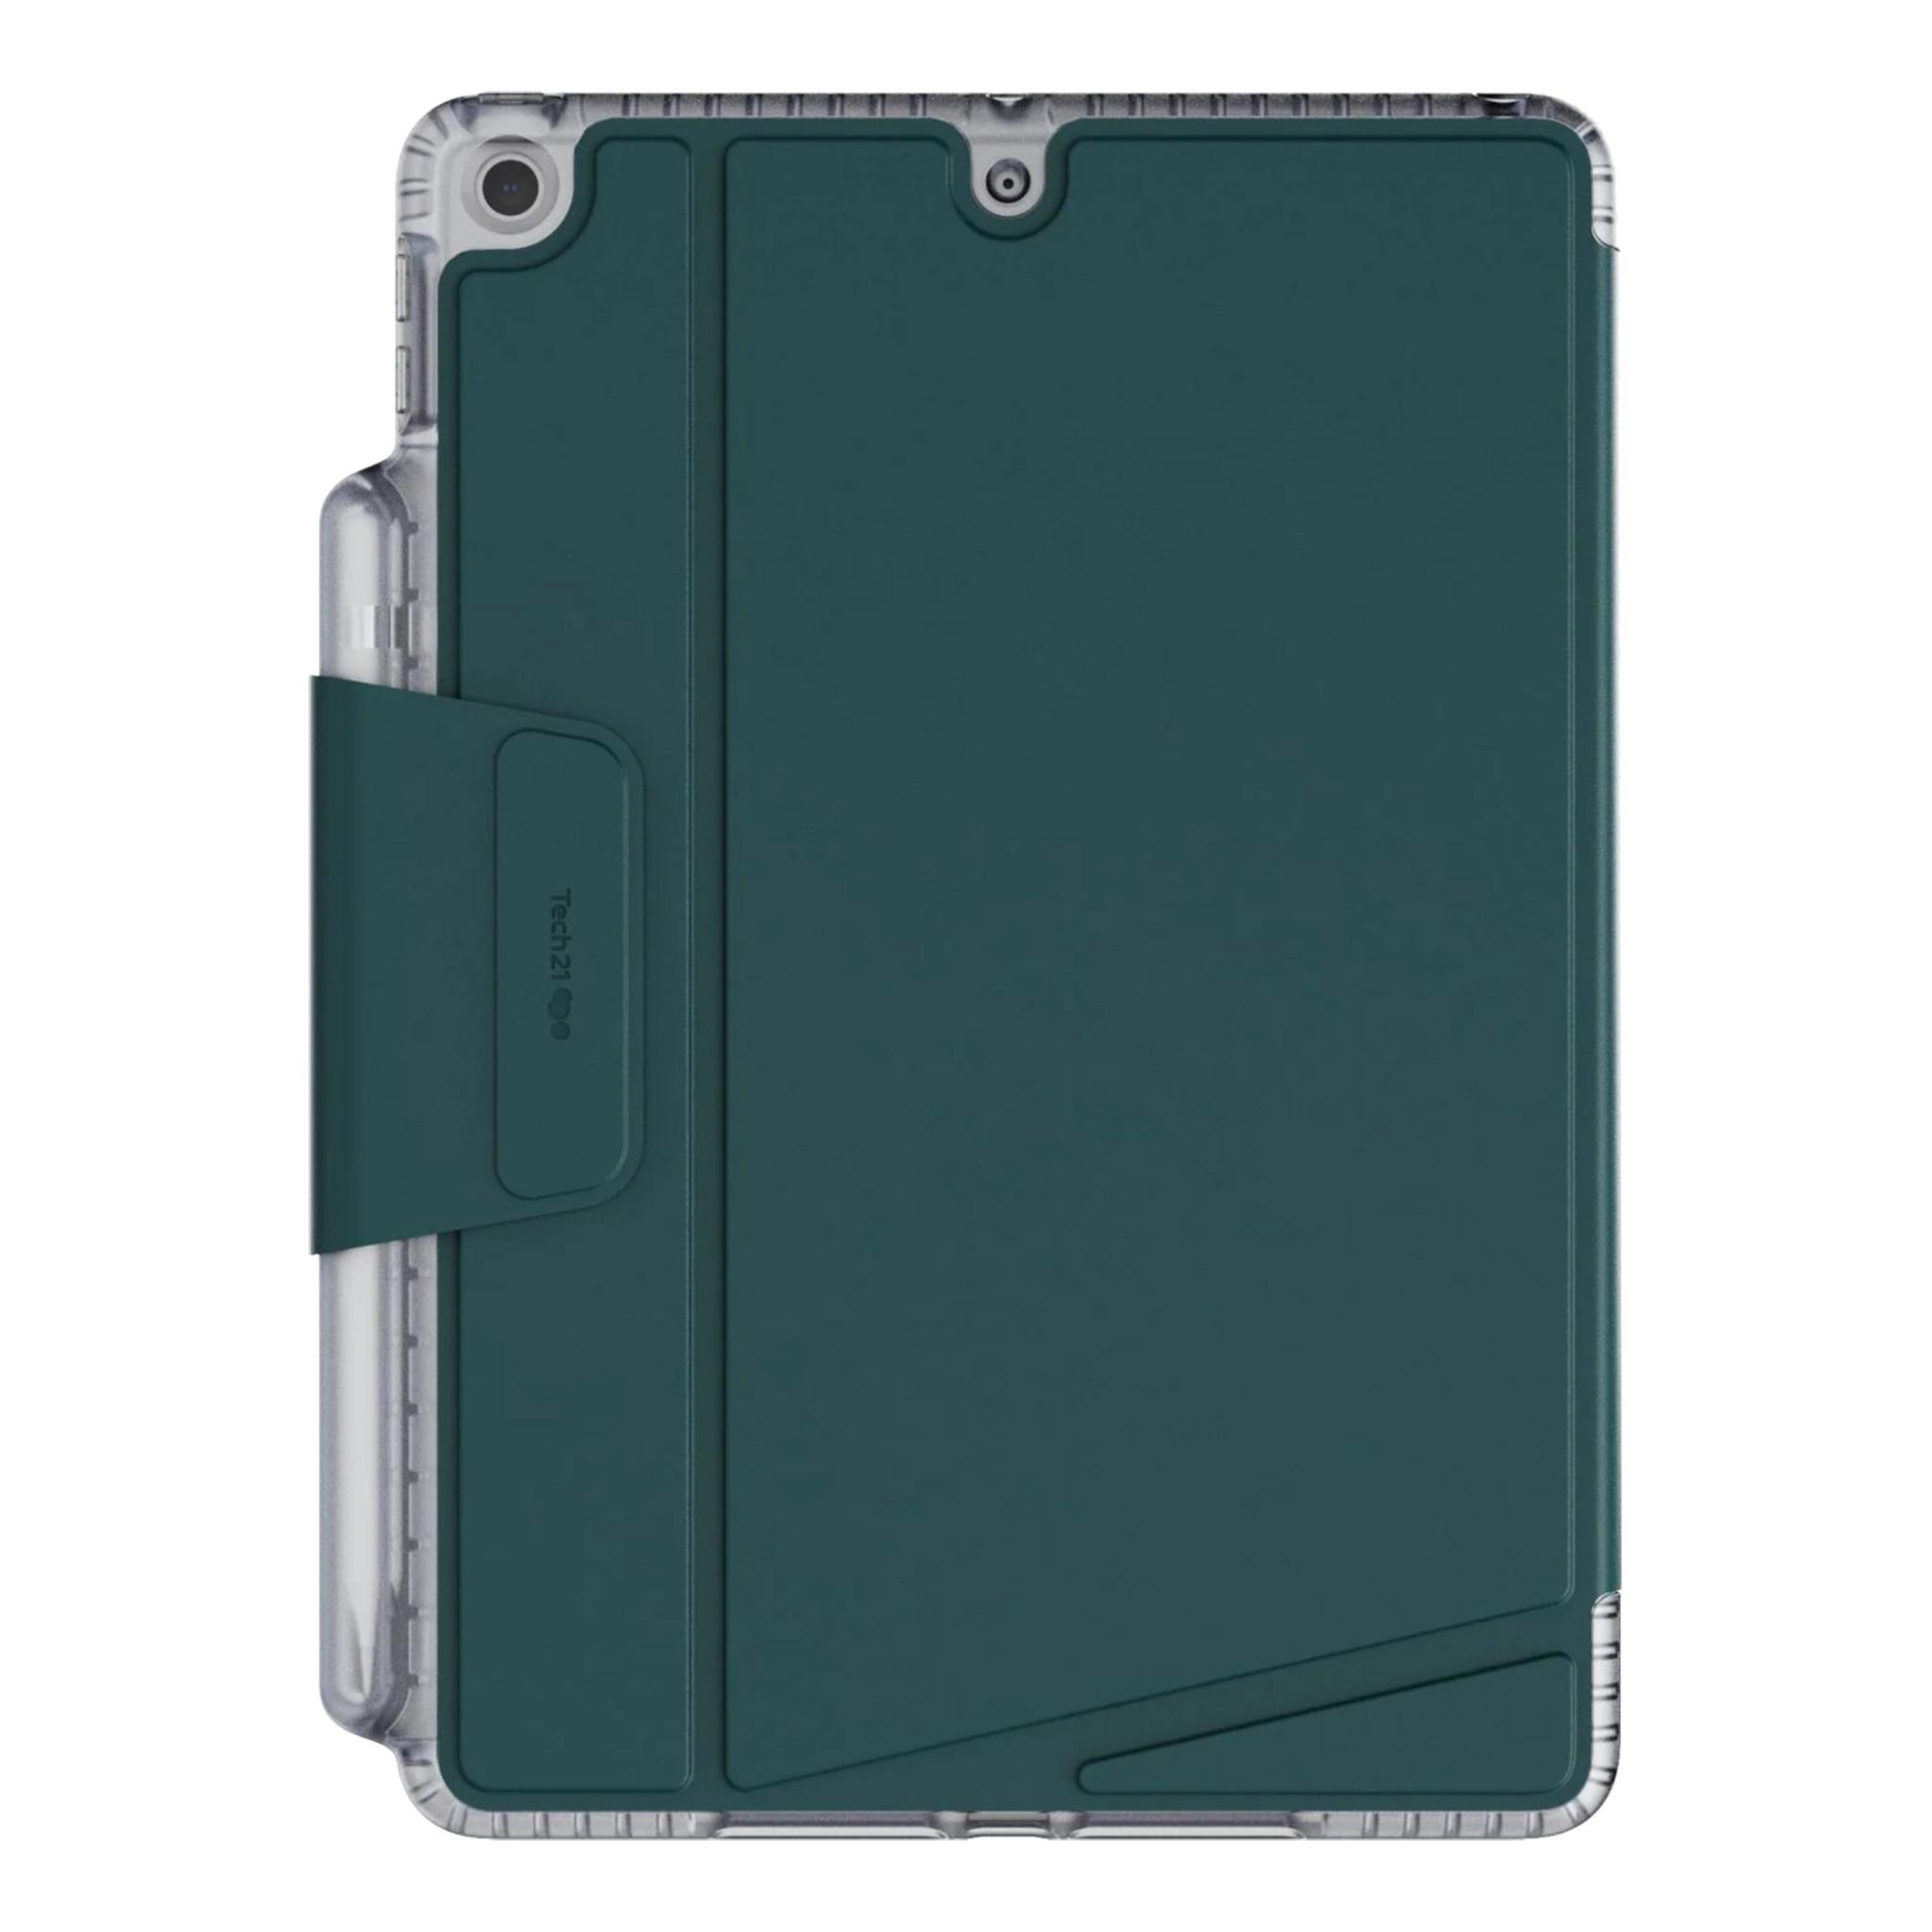 TECH21 EvoFolio Case for iPad 7th/8th /9th Gen, T21-10209 - Teal